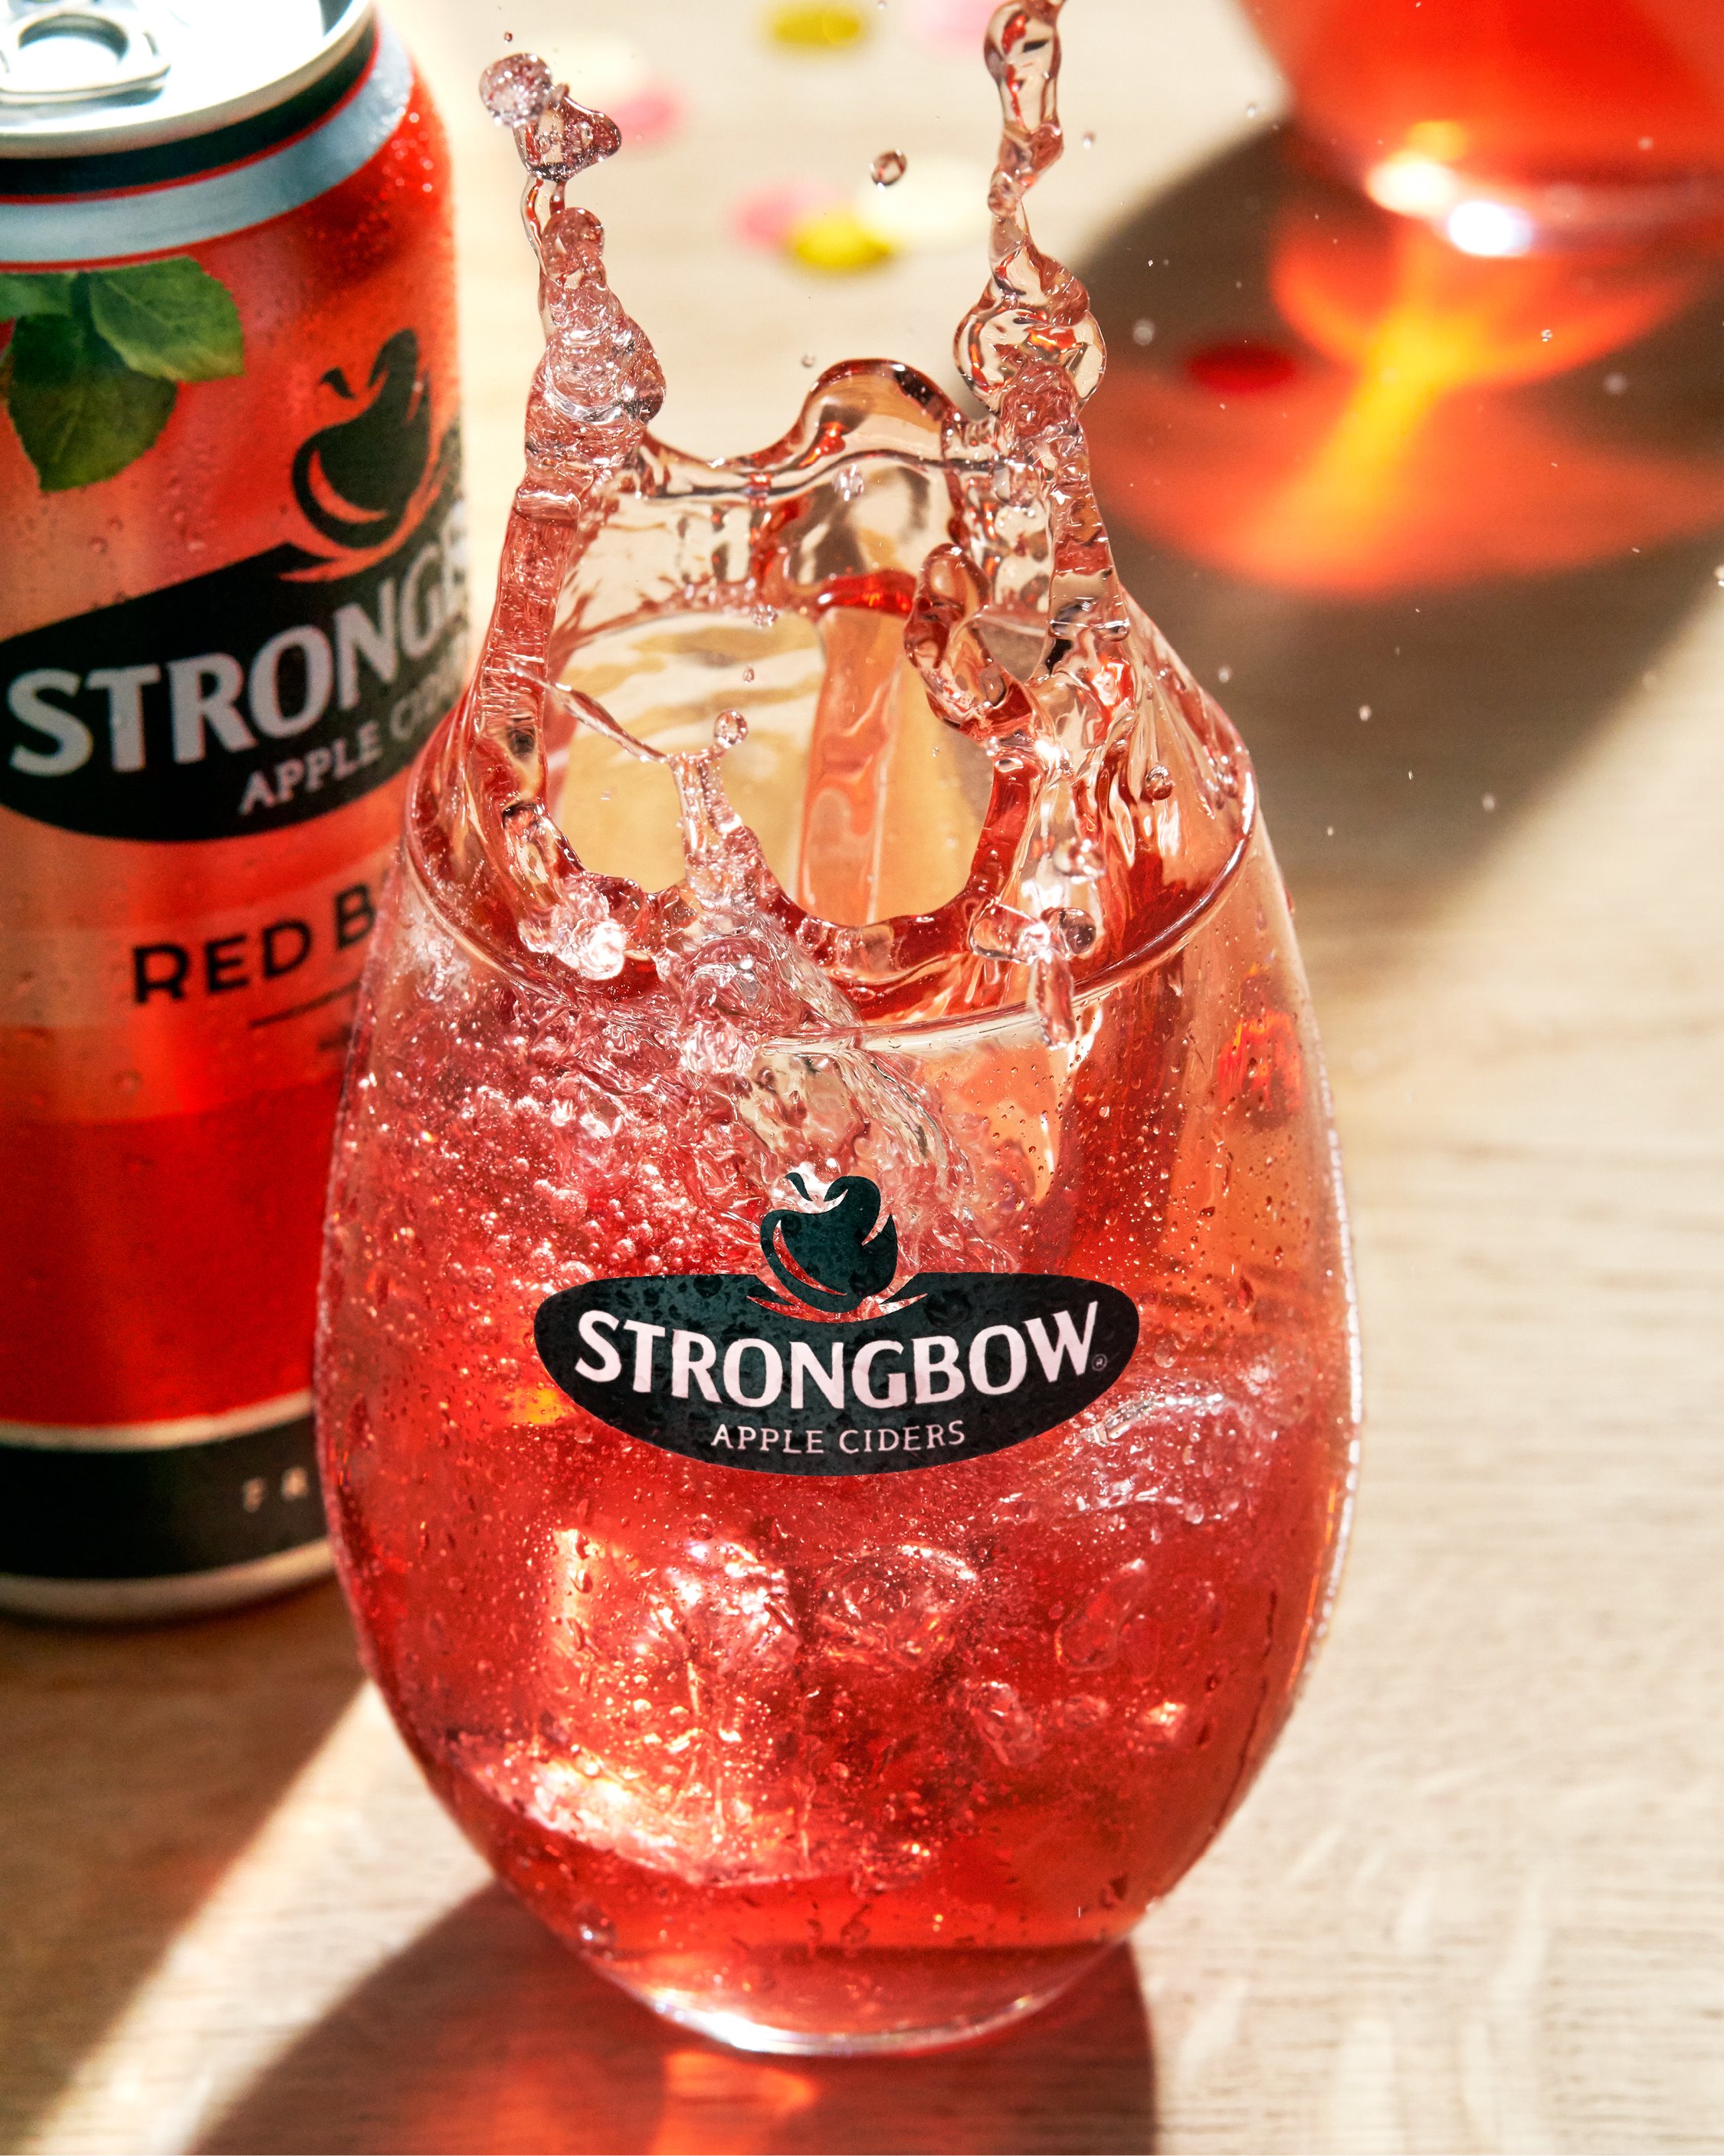 Strongbow Apple Ciders Always On Ice Cube Drop 4X5 FESTIVE Red Berries Bottle Can Big Imagery 1050 X 1350Px Social Media Global English